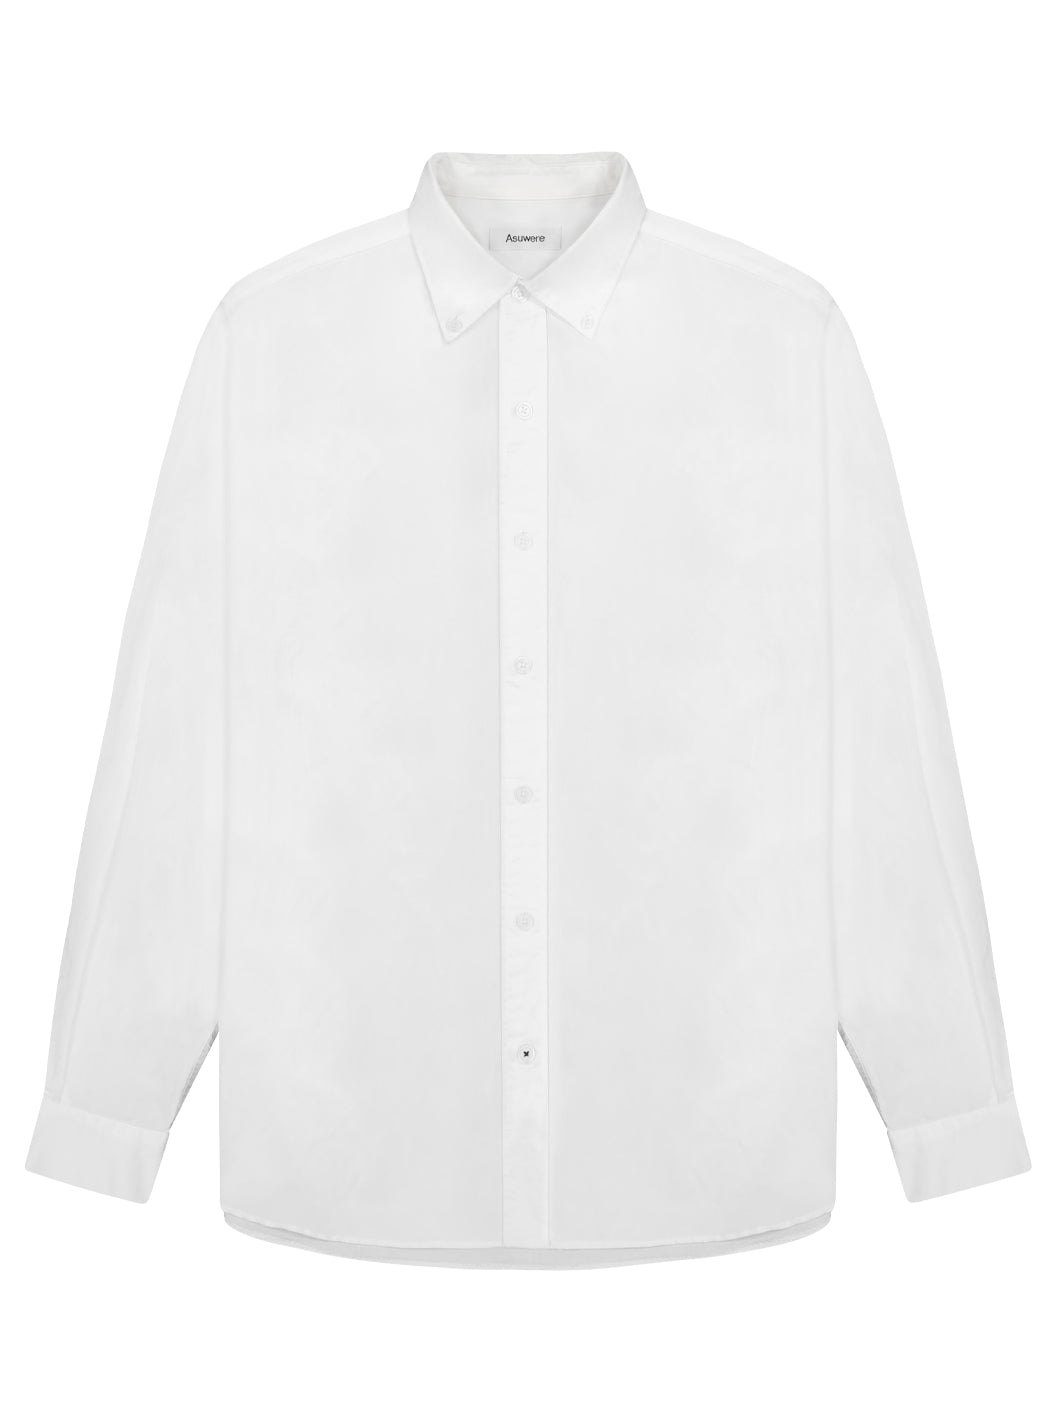 Front of white oxford shirt